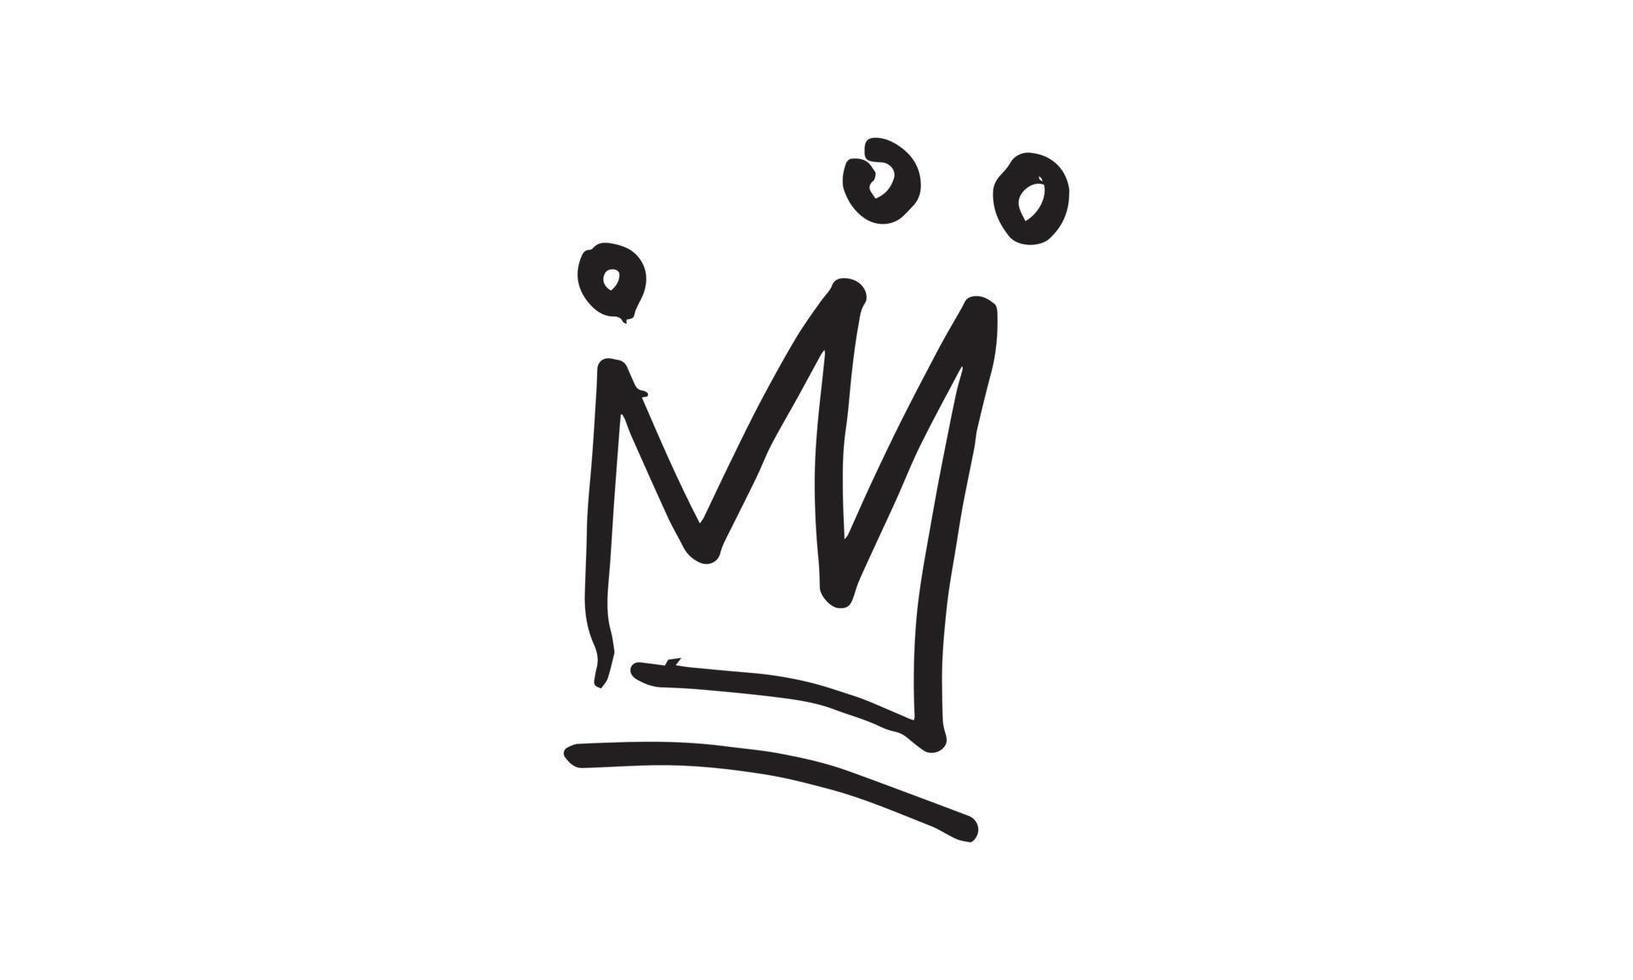 a hand drawn illustration of crown. simple and minimal vector design for element decoration. pencil sketch drawing in graphic.